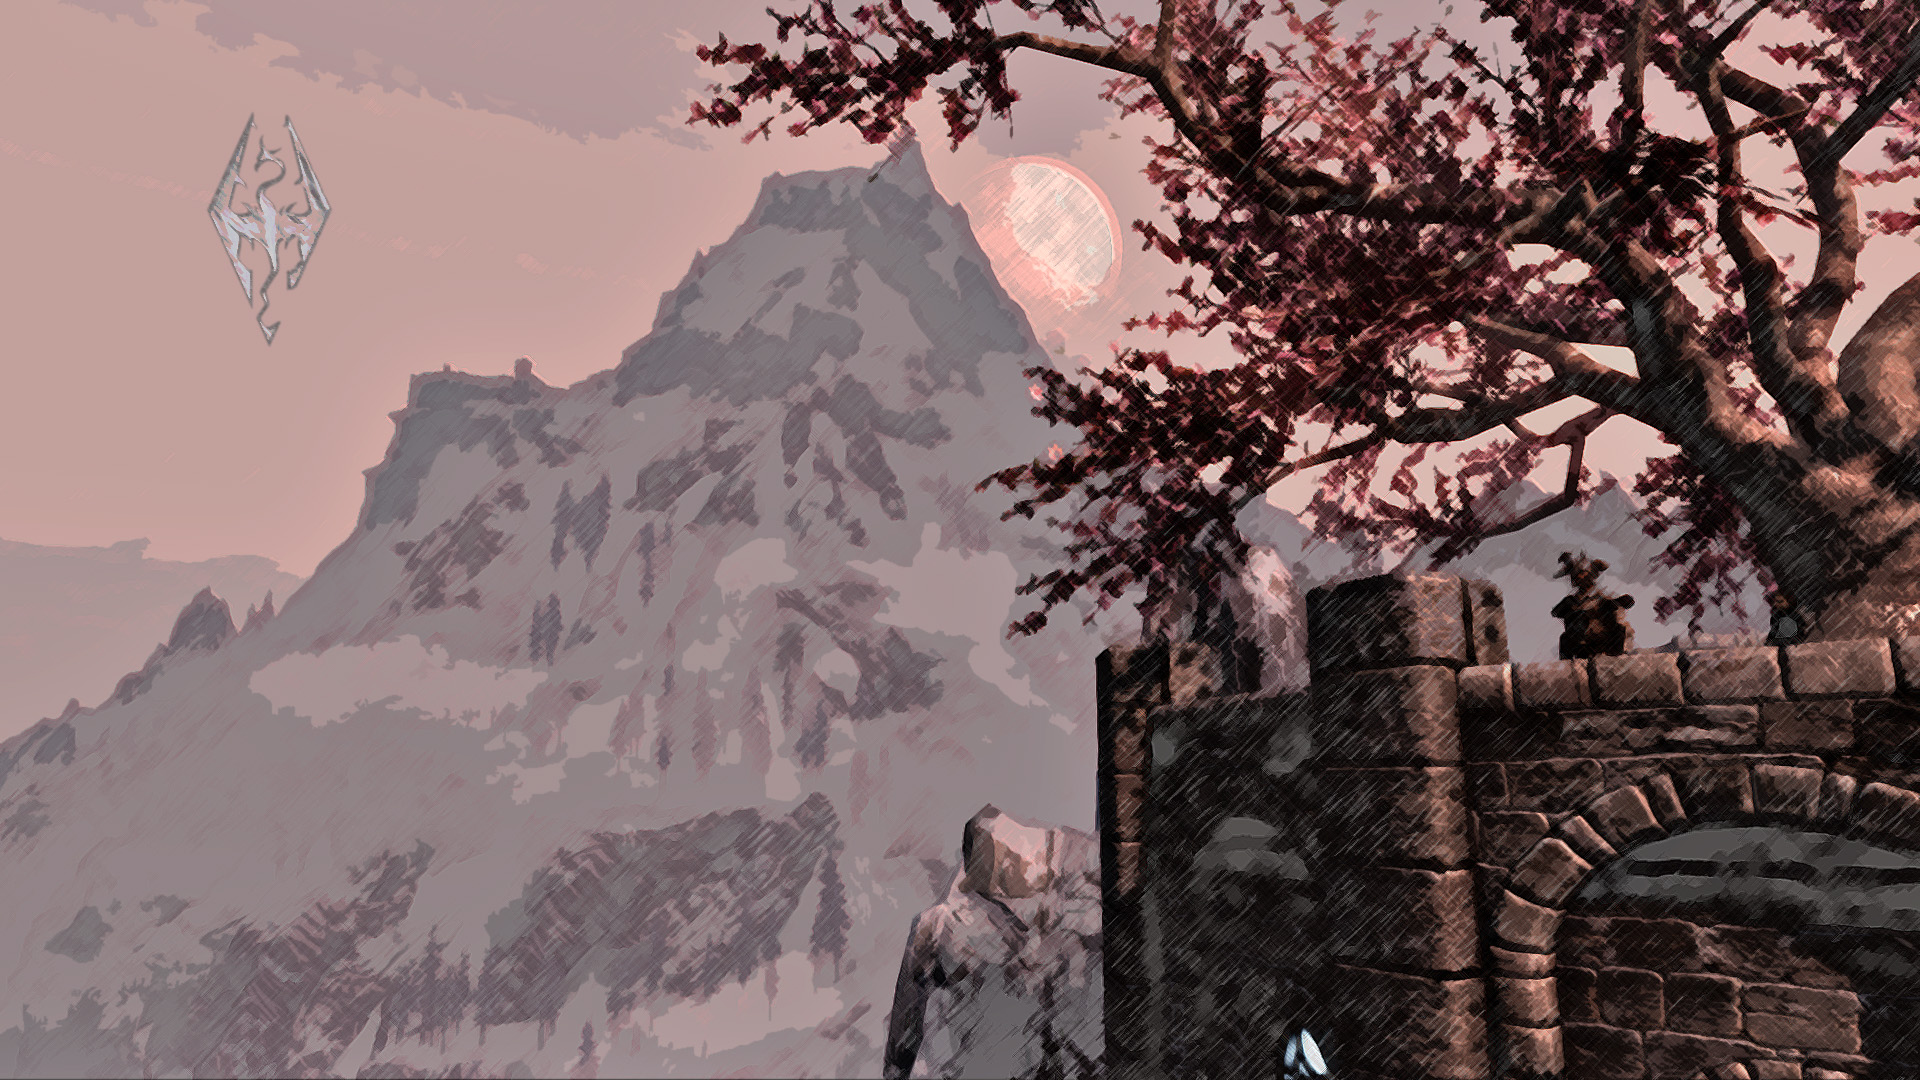 Moonrise With Cherry Blossom Skyrim HD Wallpaper By Nukez2k On